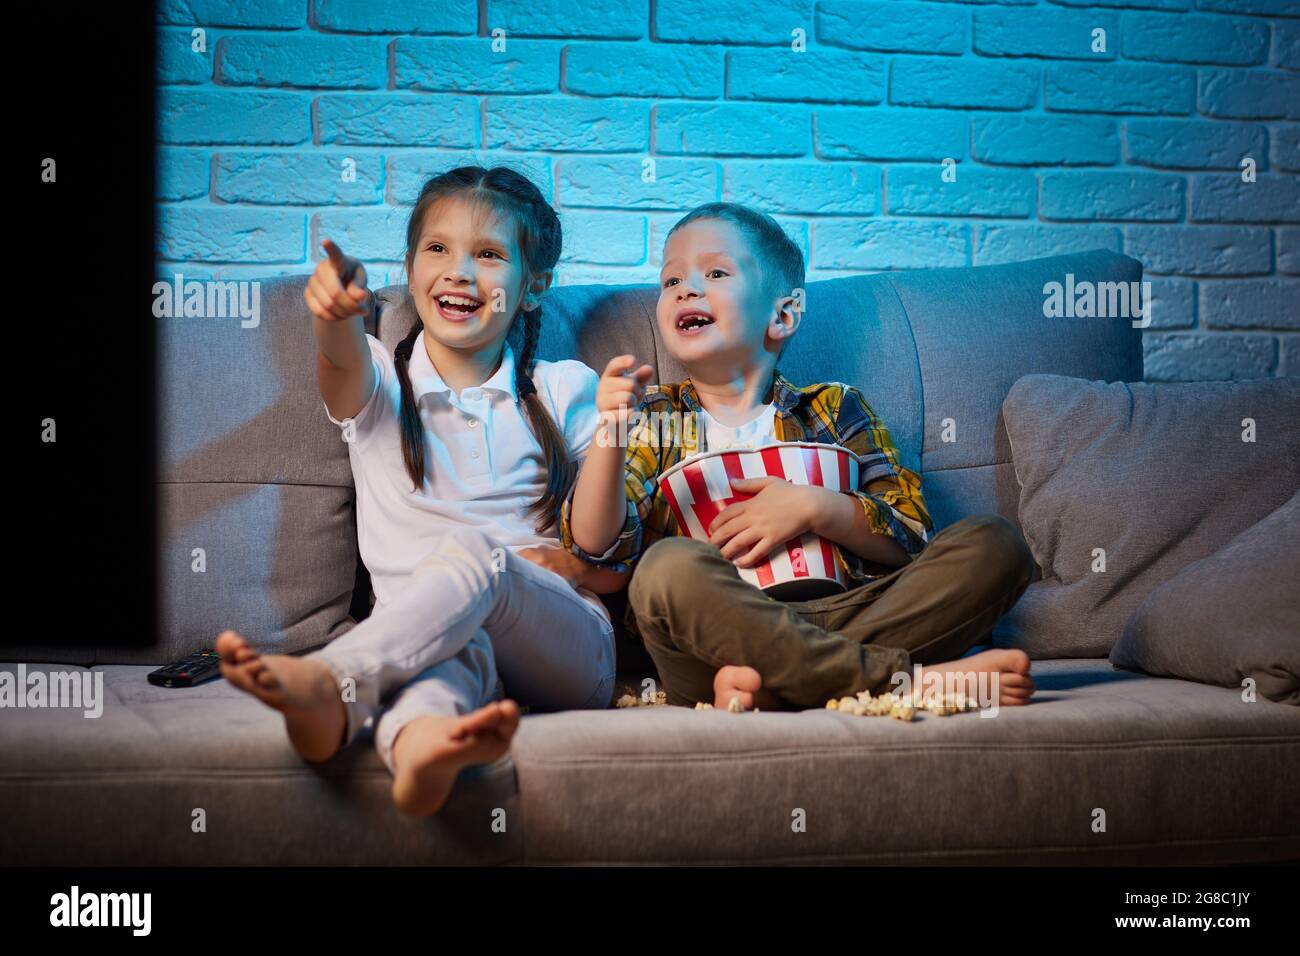 two children with remote control watching TV Stock Photo